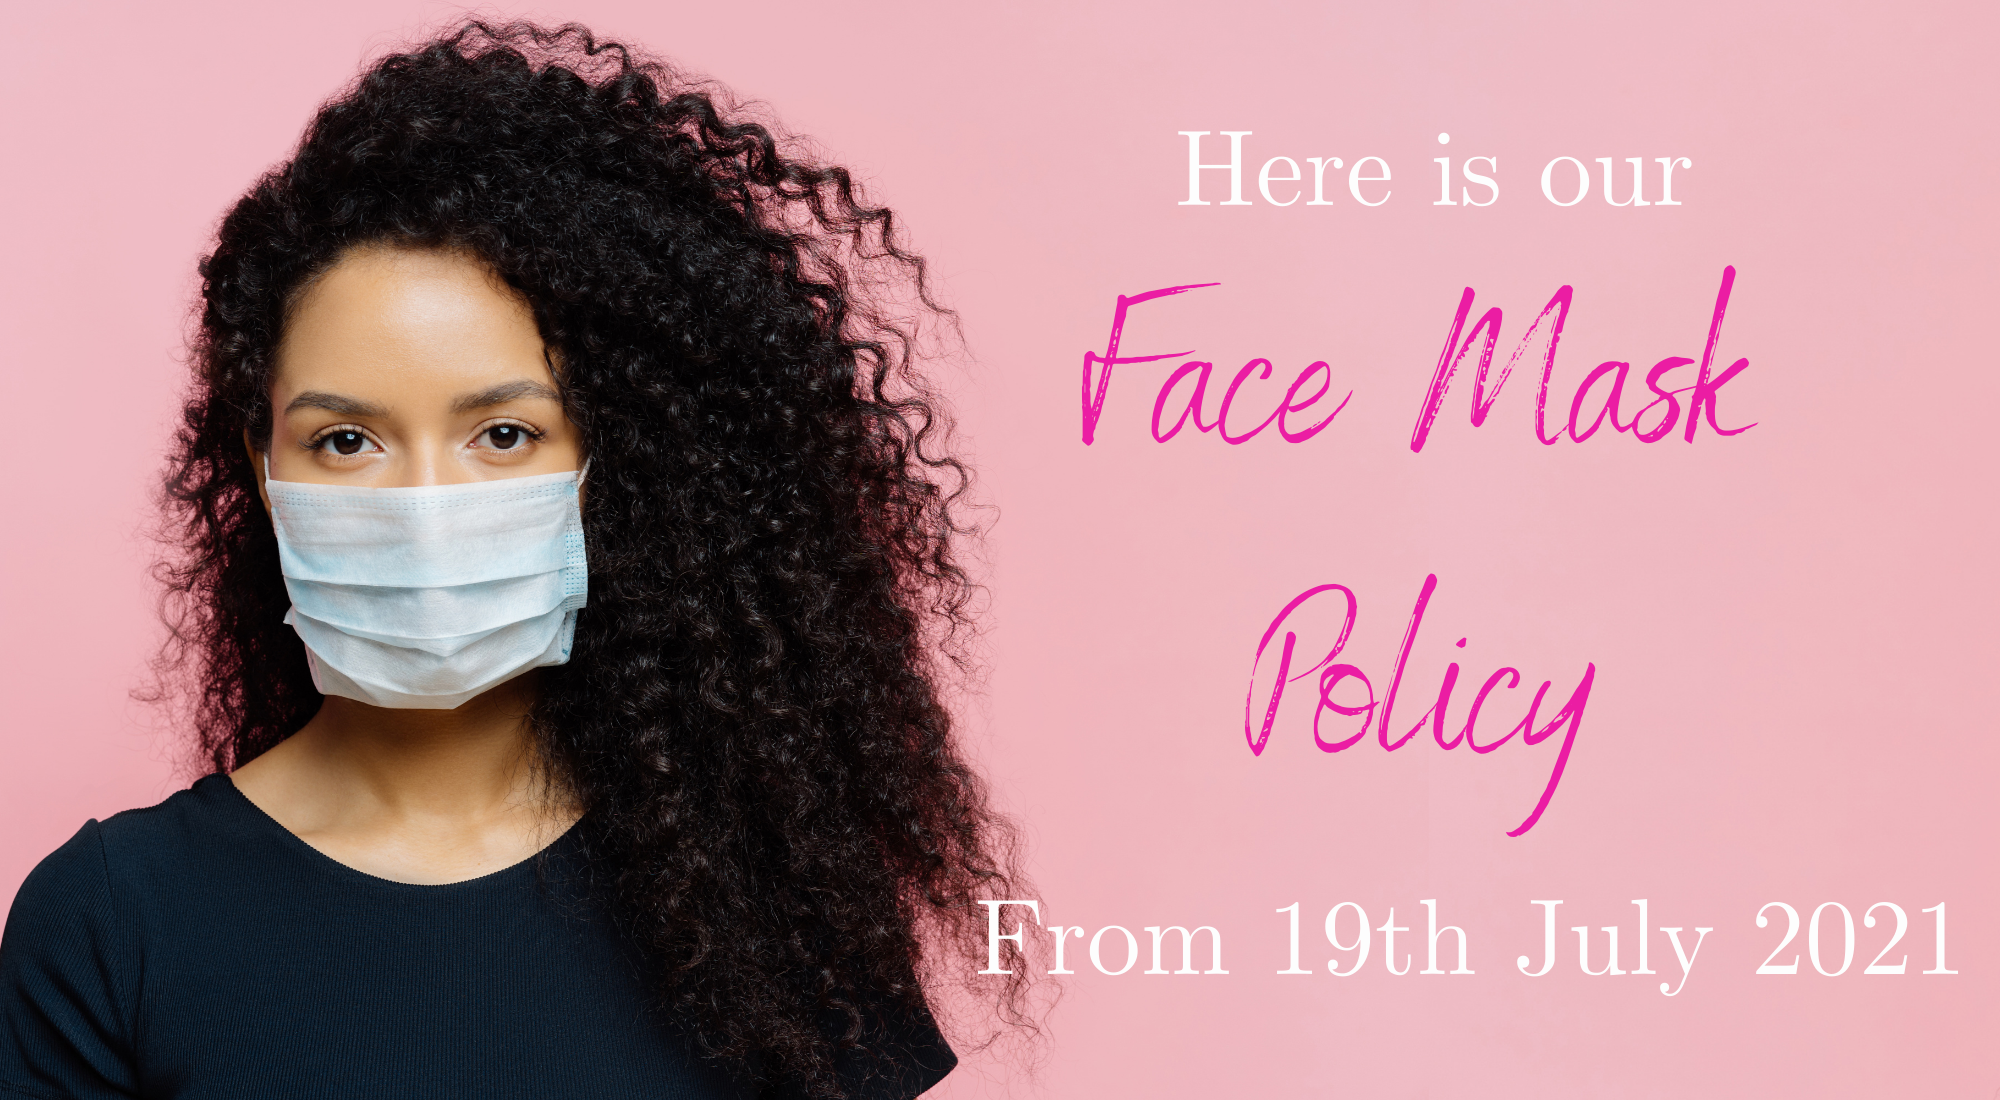 Face Mask Policy From Monday 19th July 